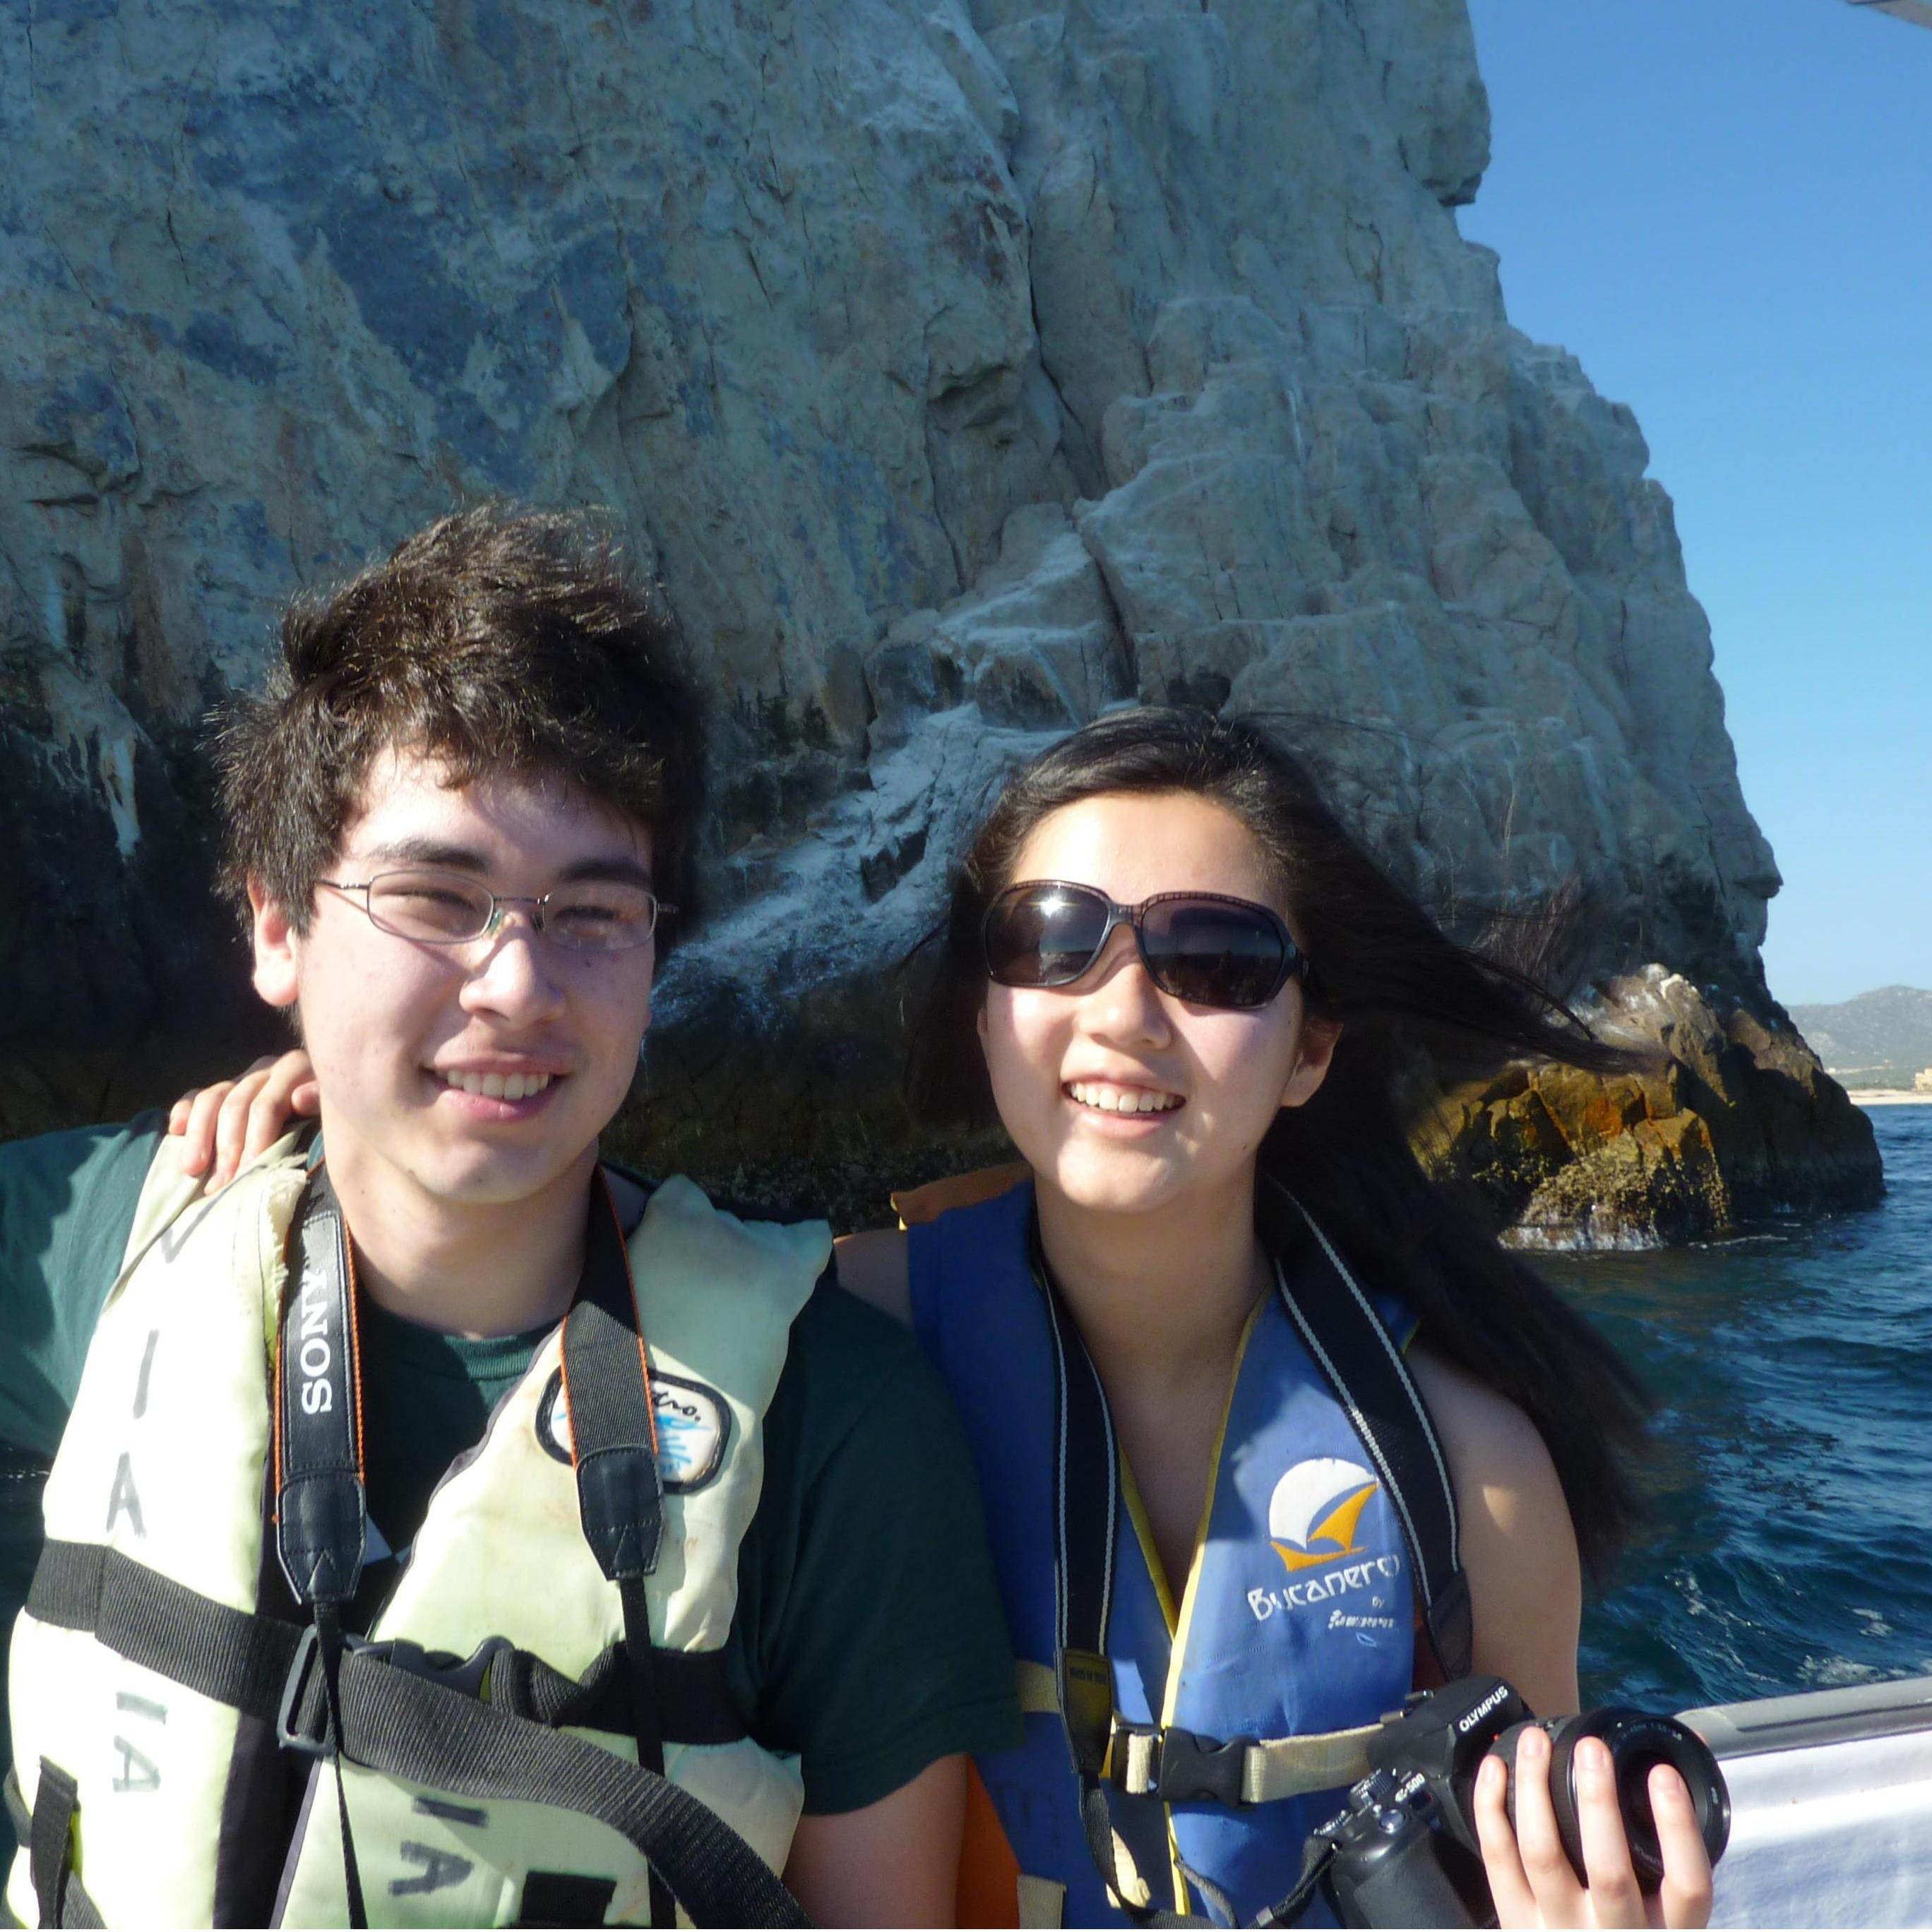 Snorkeling off the coast of Cabo San Lucas, Mexico (December 2013)